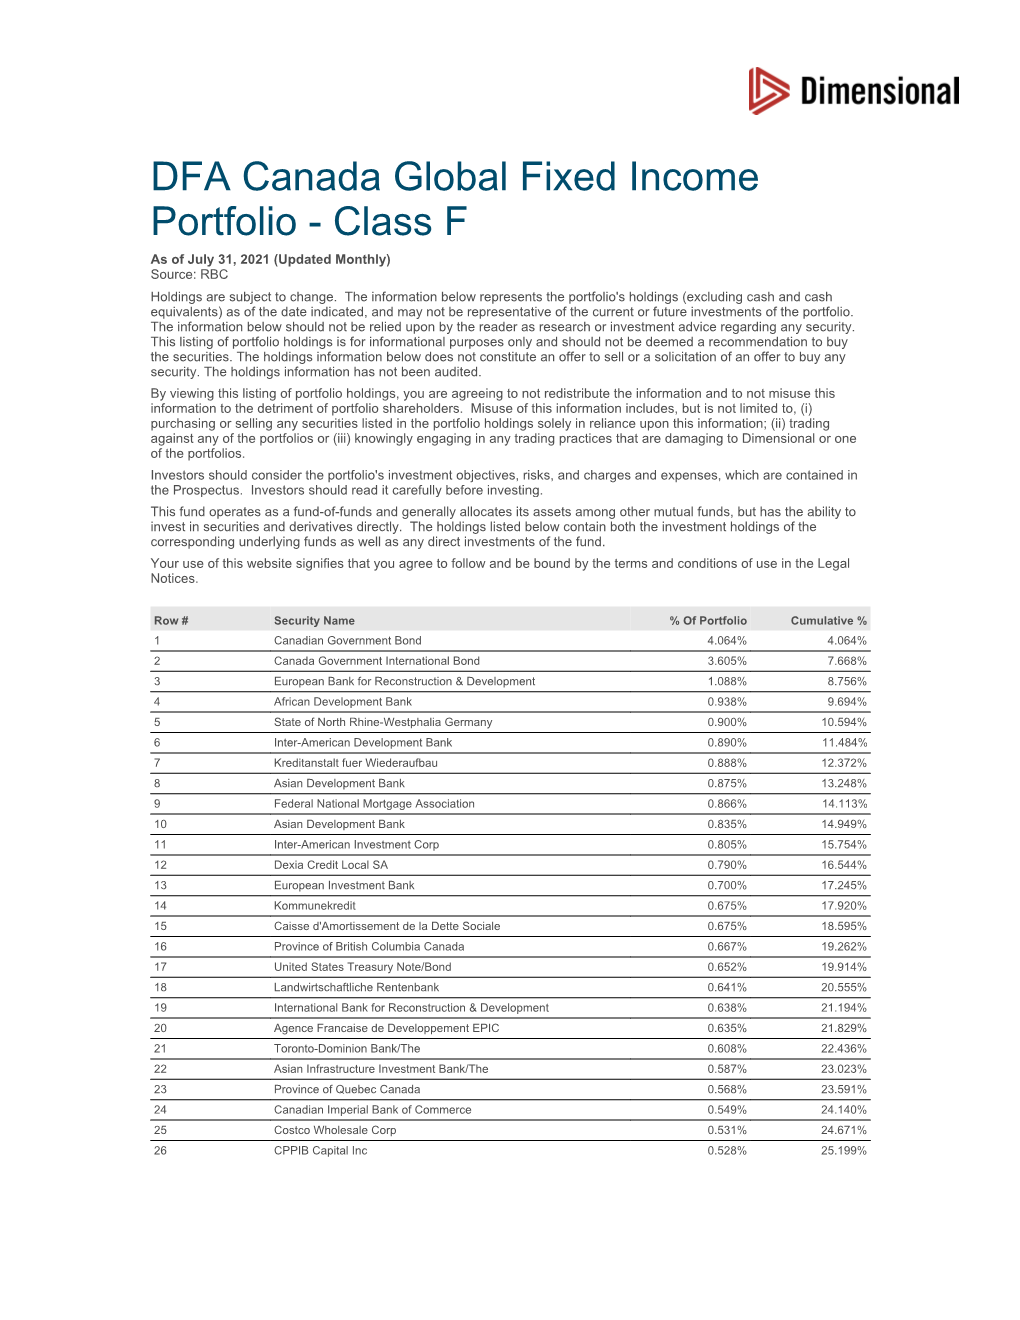 DFA Canada Global Fixed Income Portfolio - Class F As of July 31, 2021 (Updated Monthly) Source: RBC Holdings Are Subject to Change